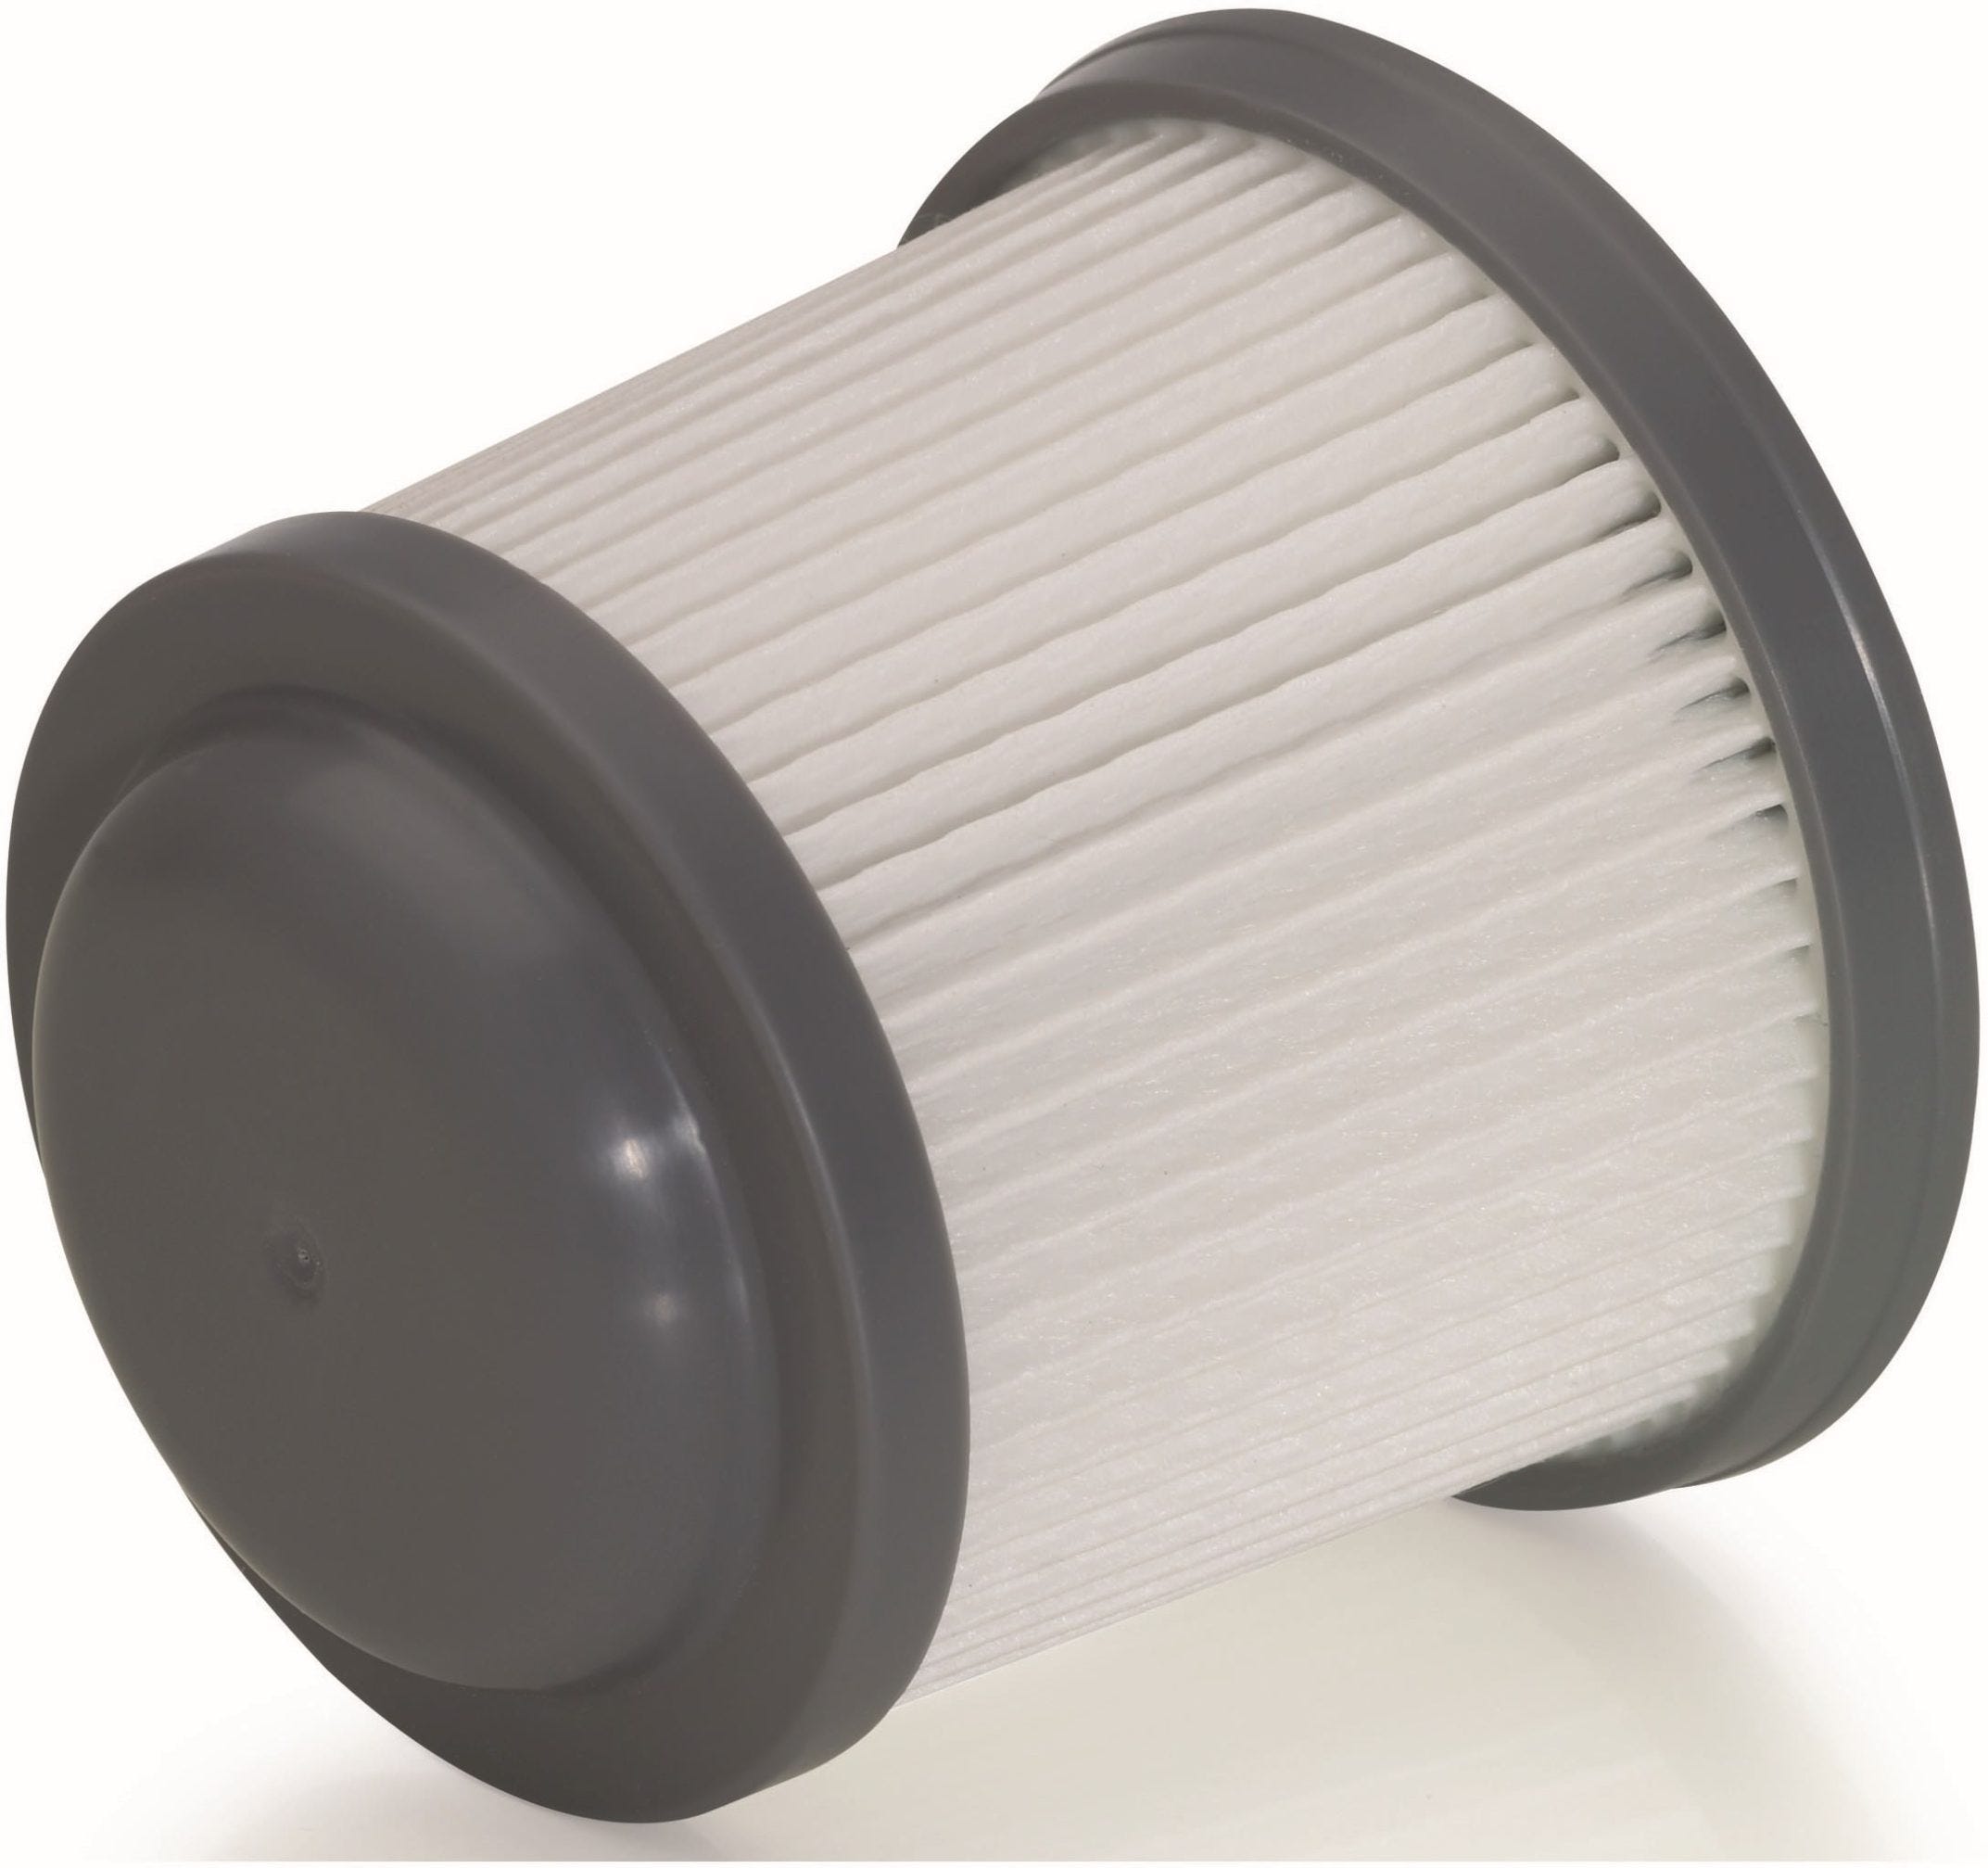 Black Decker PVF110 Replacement Filter for New Pivot Vac